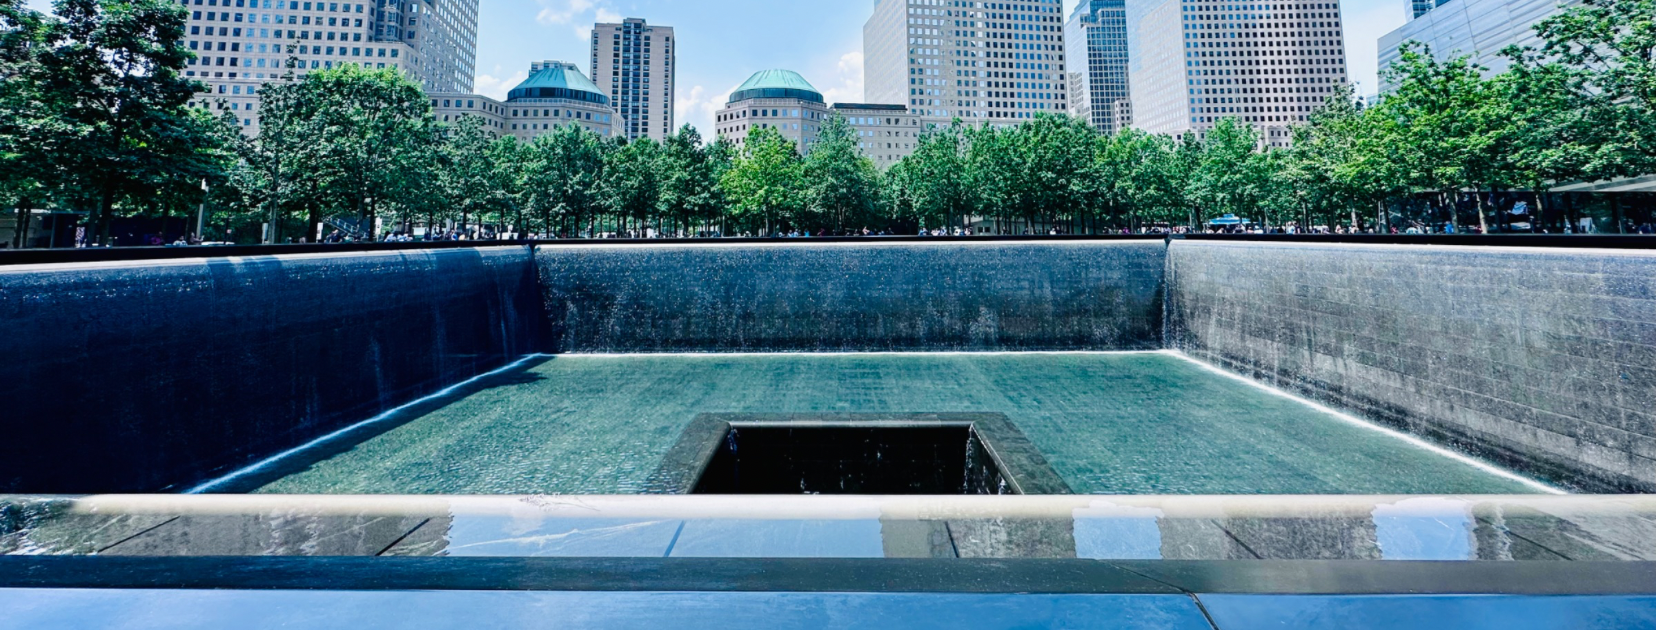 Everything You Need to Know about Visiting the 9/11 Memorial in New York City